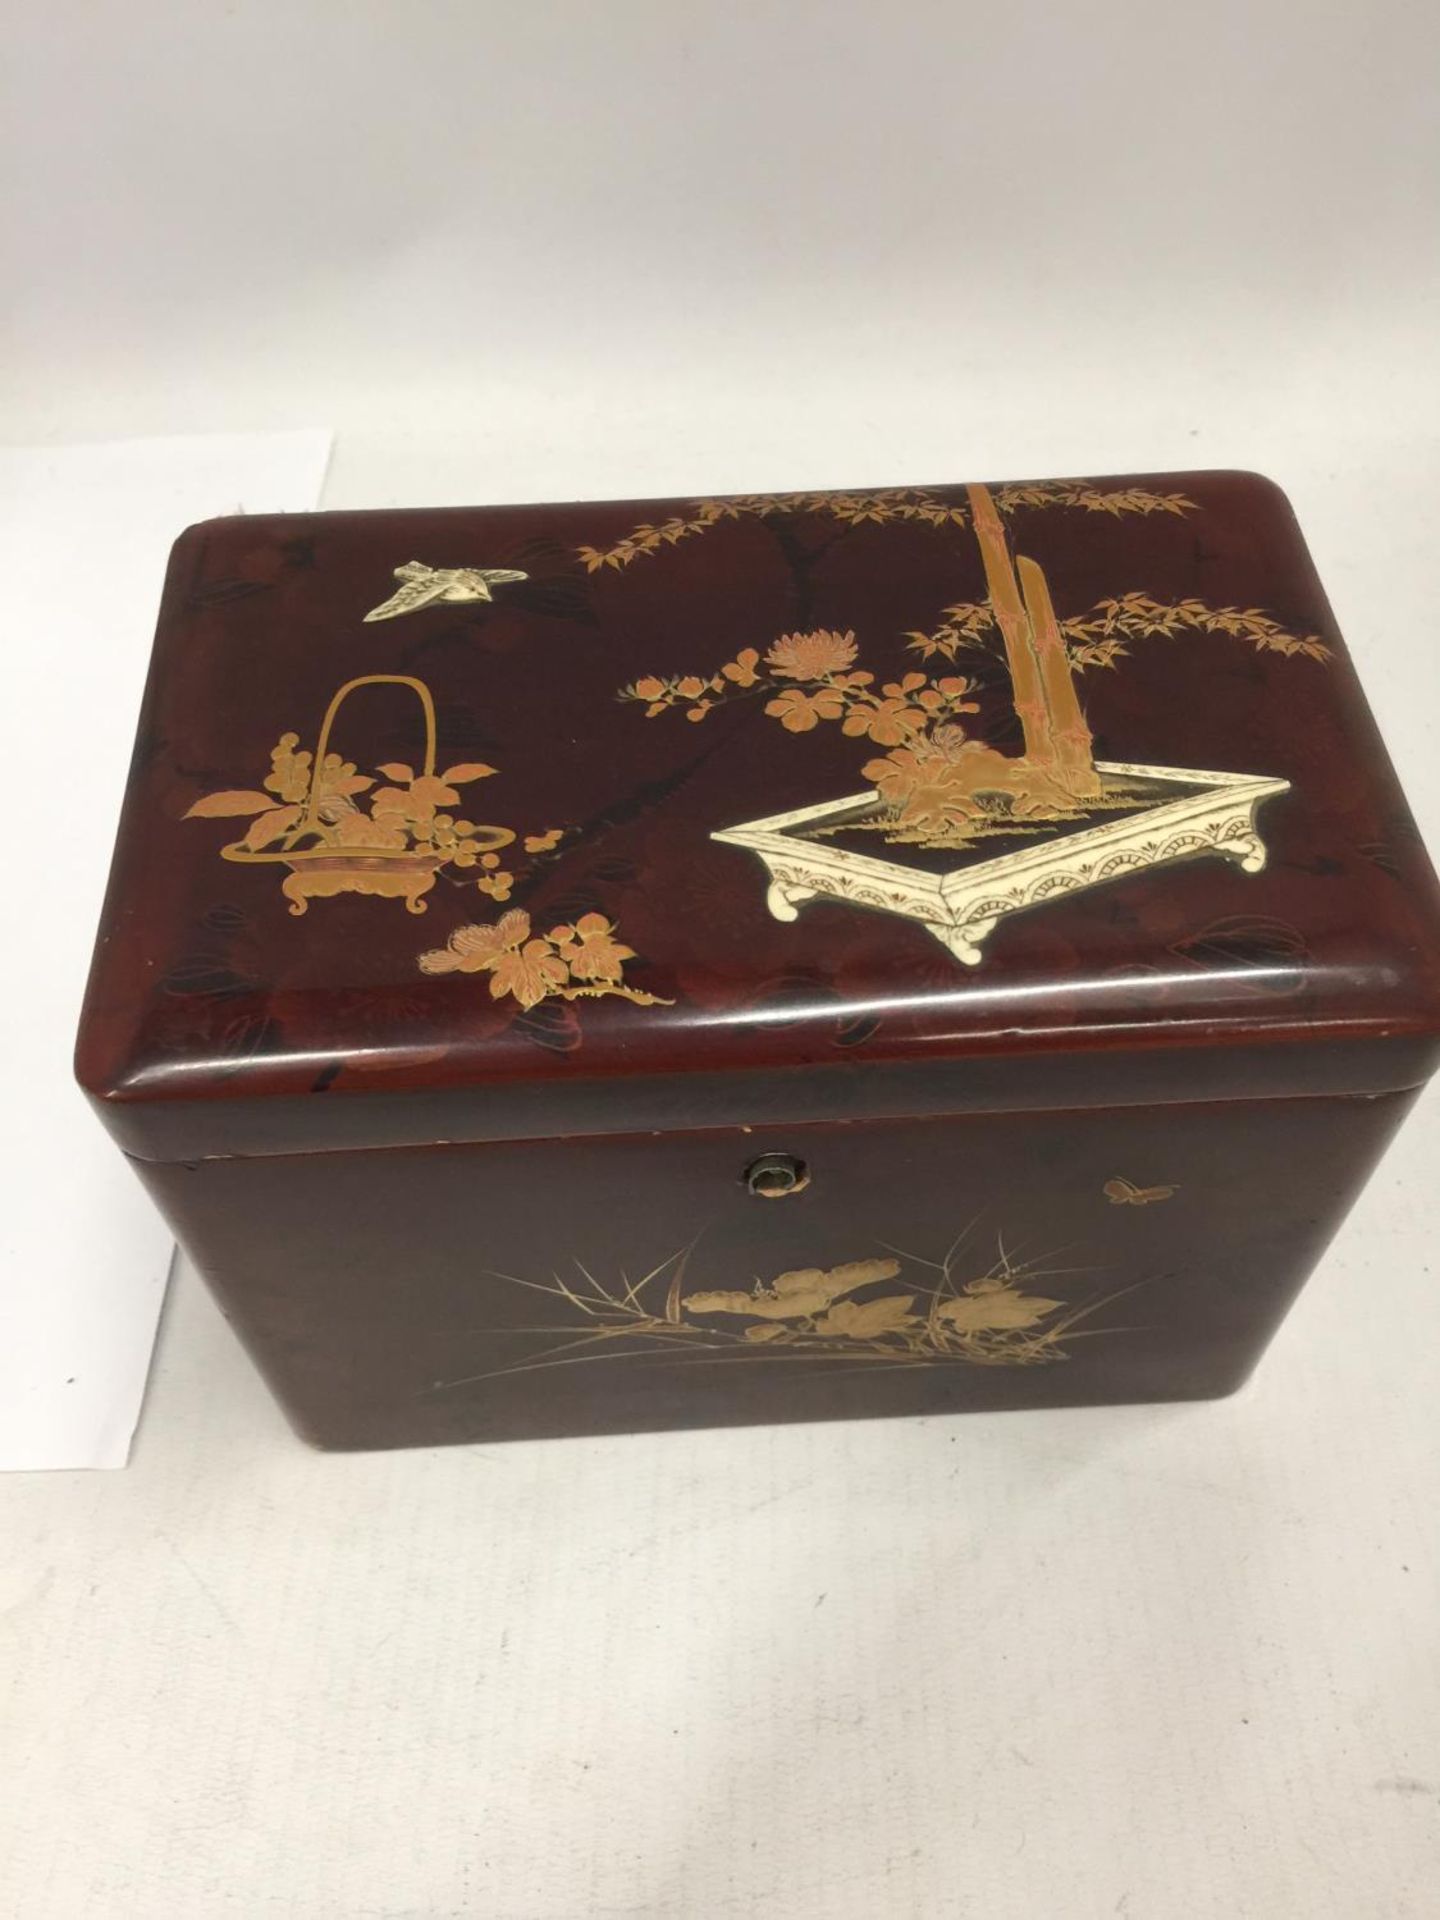 AN ORIENTAL LACQUERED TEA CADDY WITH EMBOSSED DECORATION, WITH TWO INNER COMPARTMENTS, THE INSIDE